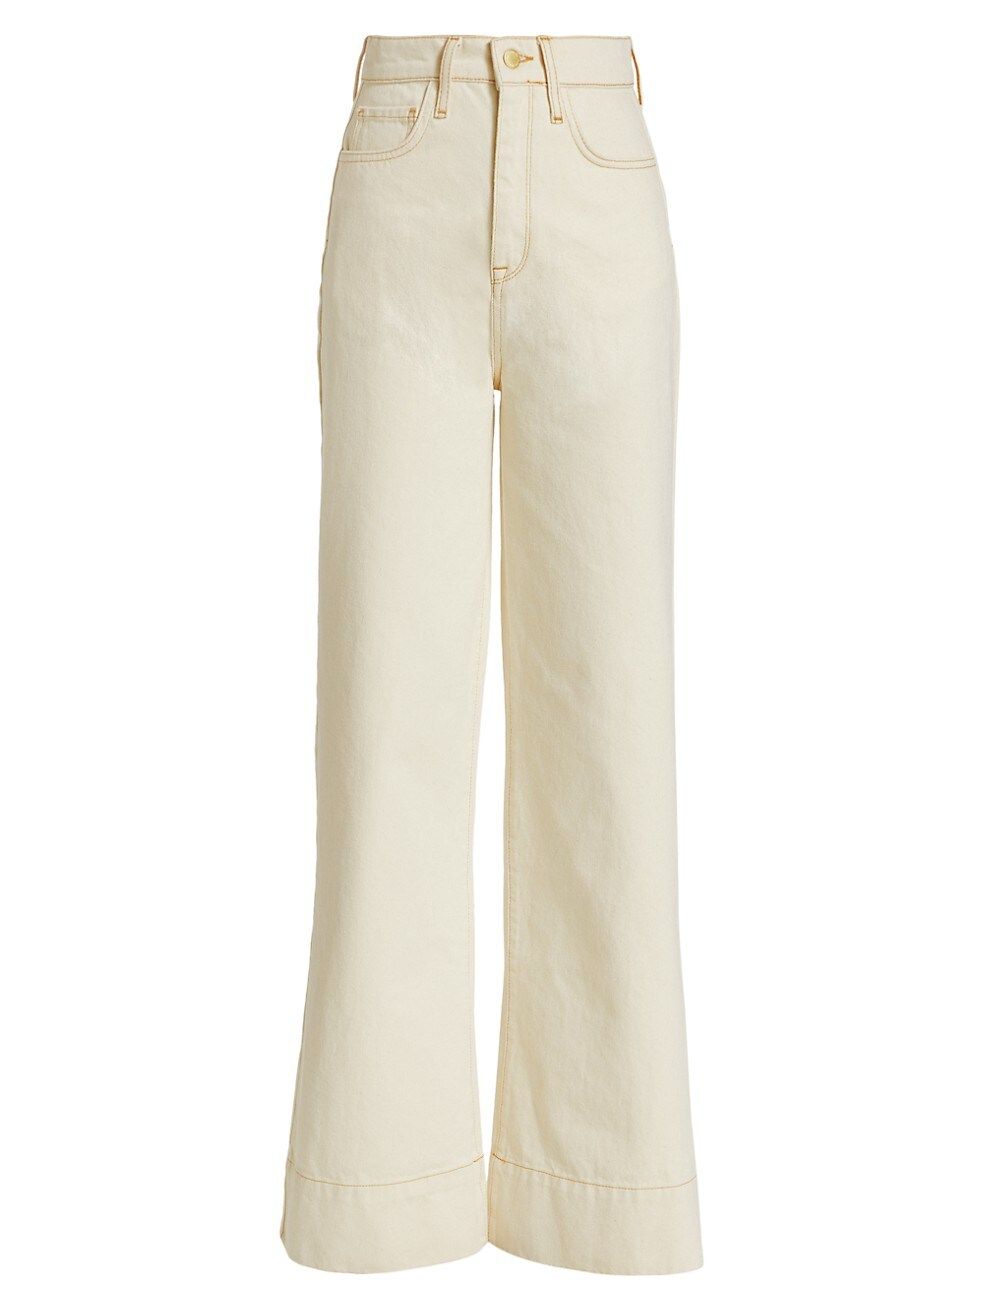 Triarchy Ms. Onassis Wide-Leg Jeans | Saks Fifth Avenue